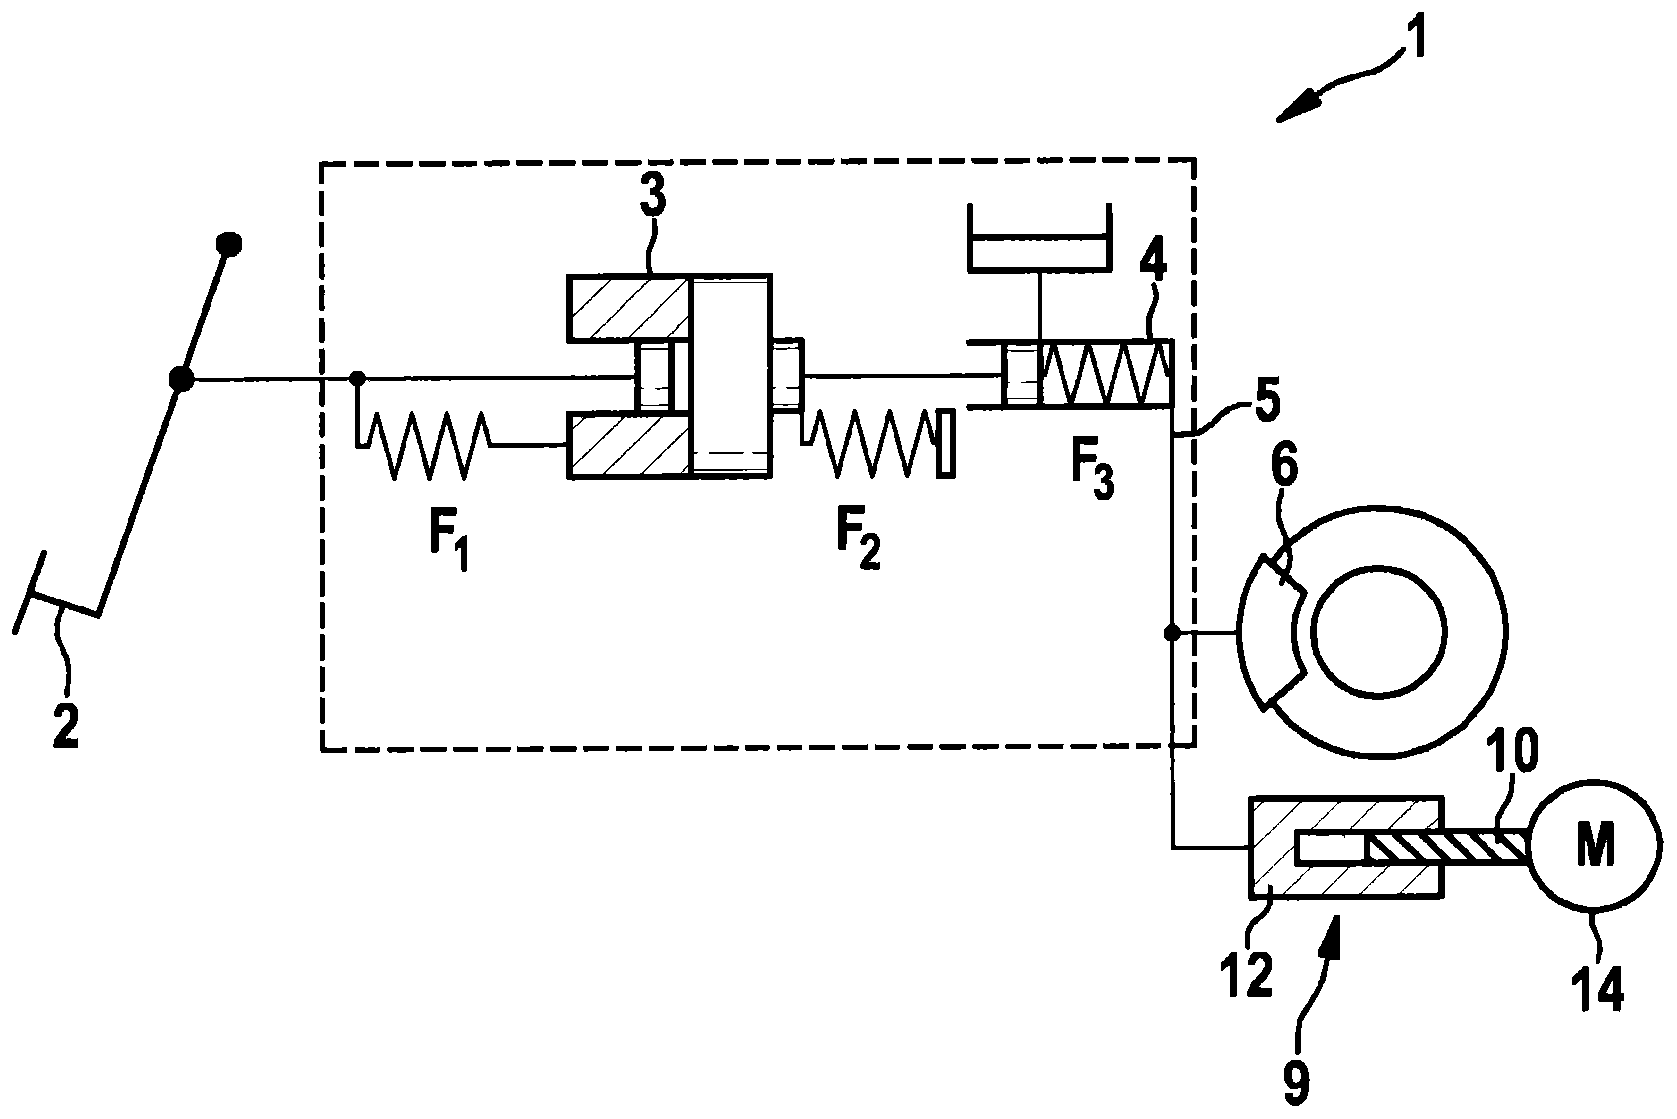 Compensation device for a brake system, and brake system having a compensation device of this type